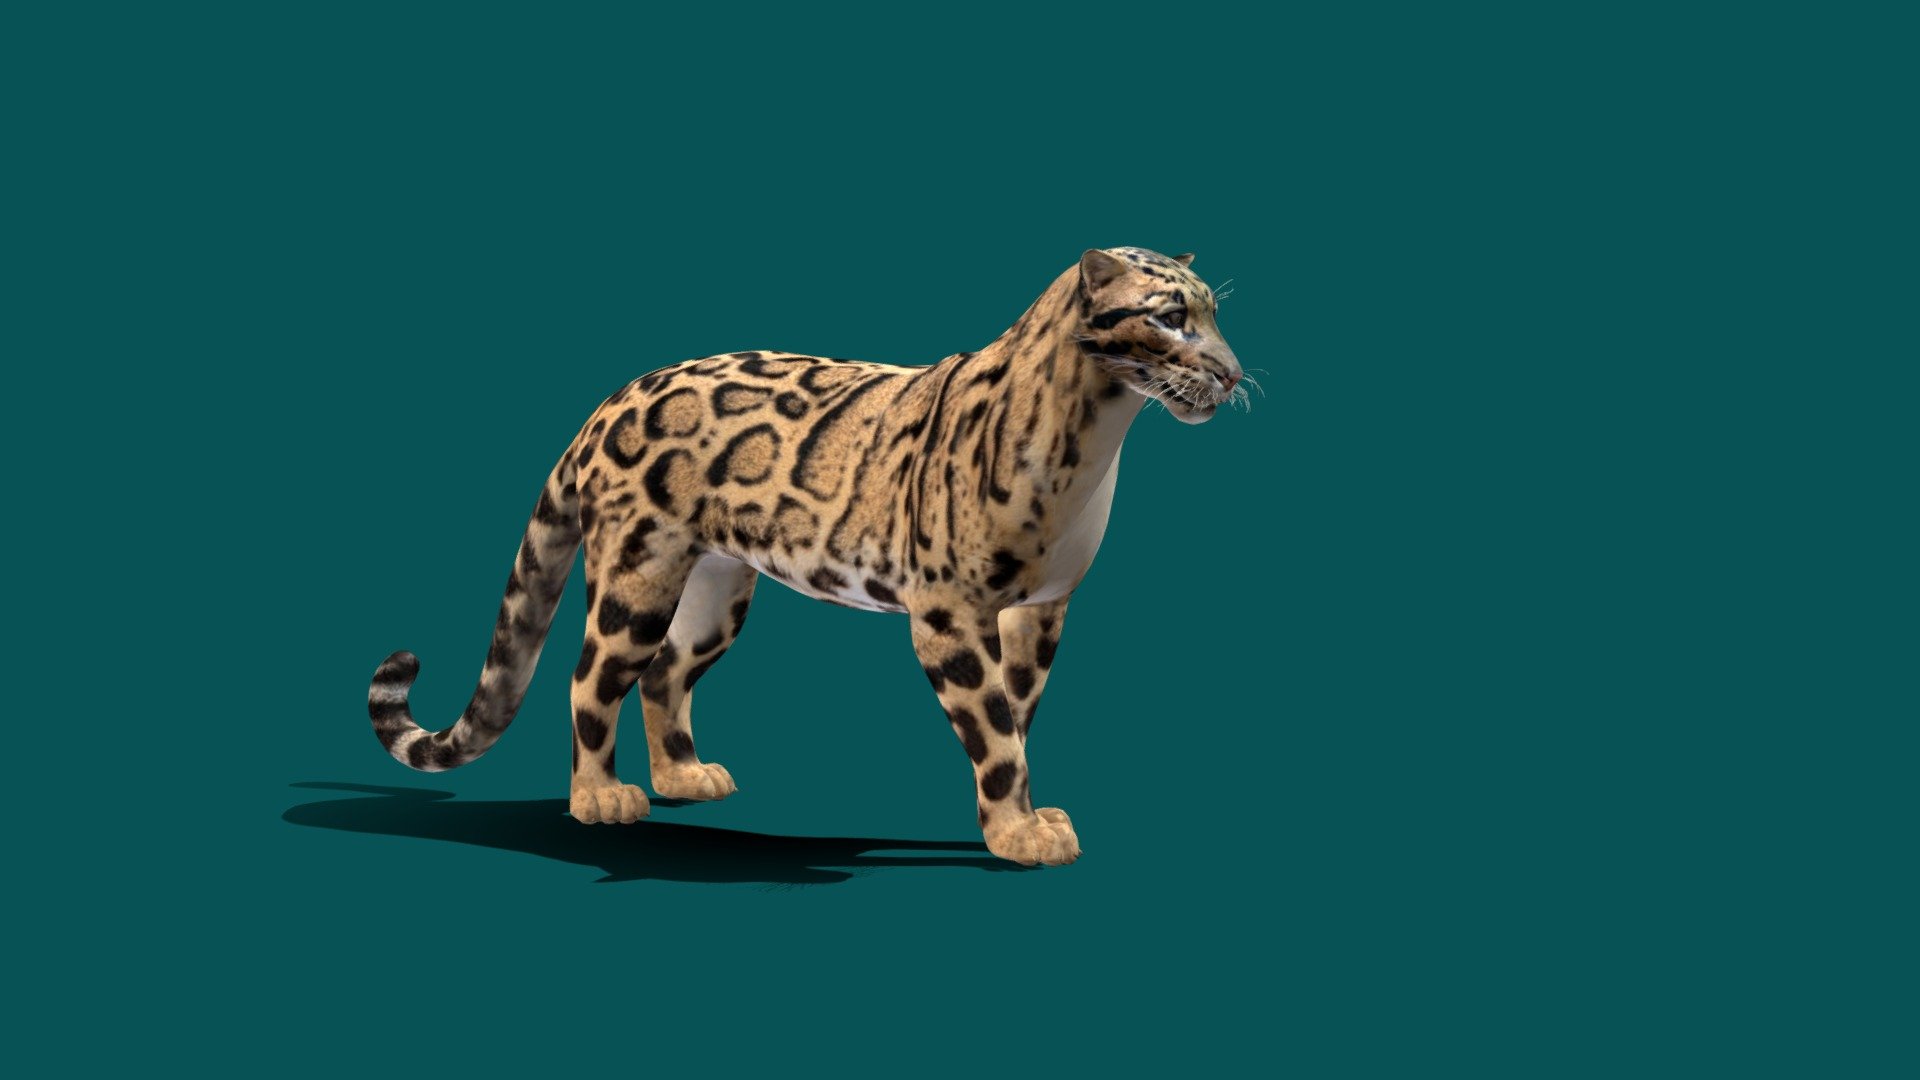 **Clouded Leopard with 4K PBR Textures Material **
REF

The clouded leopard, also called mainland clouded leopard, is a wild cat inhabiting dense forests from the foothills of the Himalayas through Northeast India and Bhutan to mainland Southeast Asia into South China. It was first described in 1821 on the basis of a skin of an individual from China. Wikipedia
Conservation status: Vulnerable (Population decreasing) Encyclopedia of Life
Scientific name: Neofelis nebulosa
Mass: 12 – 23 kg
Trophic level: Carnivorous Encyclopedia of Life
Gestation period: 93 days Encyclopedia of Life
Length: 84 cm (Adult) Encyclopedia of Life
Family: Felidae - Clouded Leopard - 3D model by Nyilonelycompany 3d model